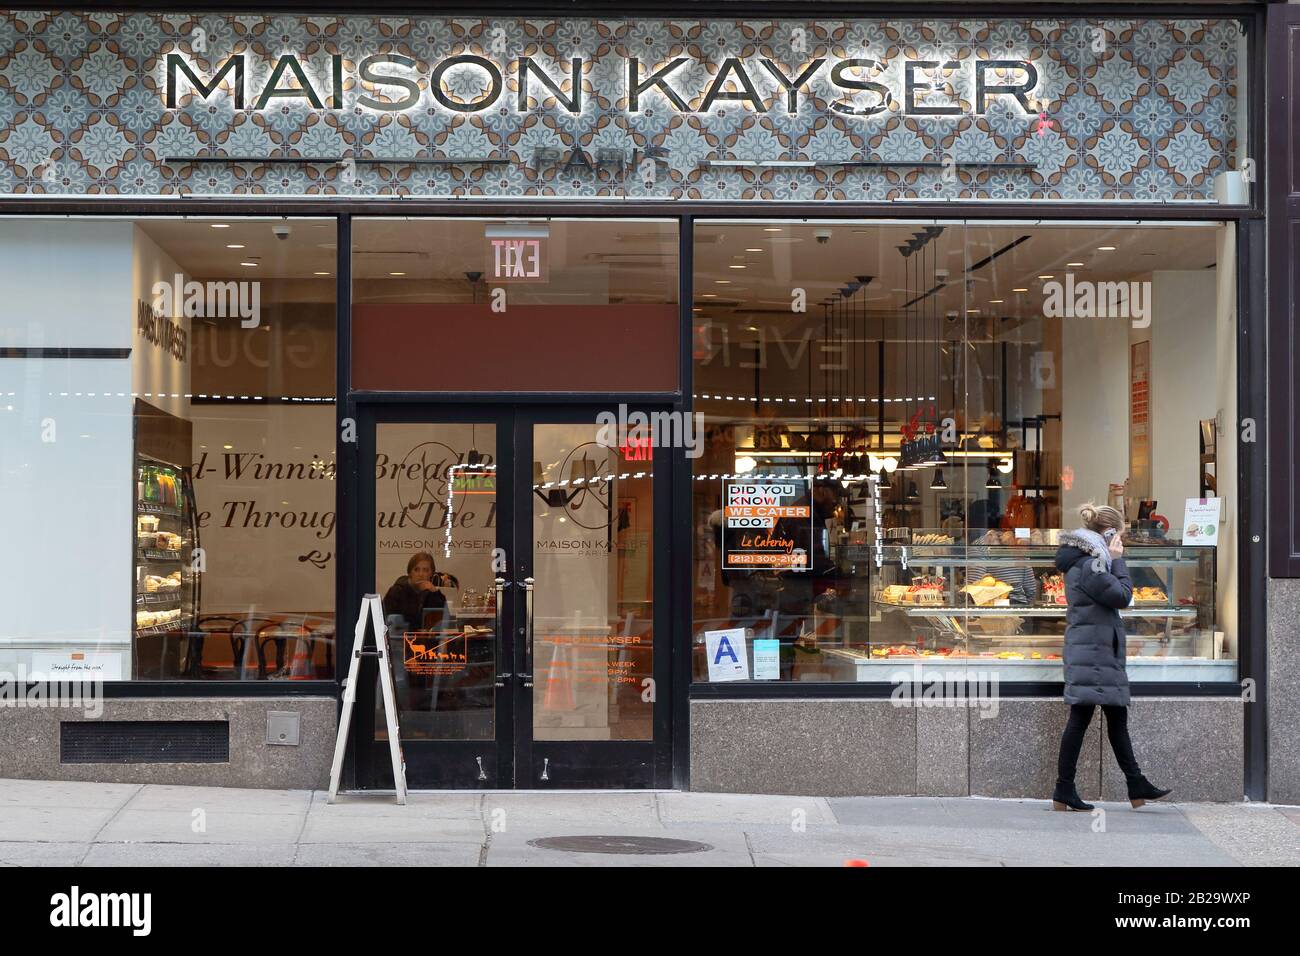 [historical storefront] Maison Kayser, 370 Lexington Ave, New York, NYC storefront photo of a french bakery cafe in Midtown Manhattan. Stock Photo